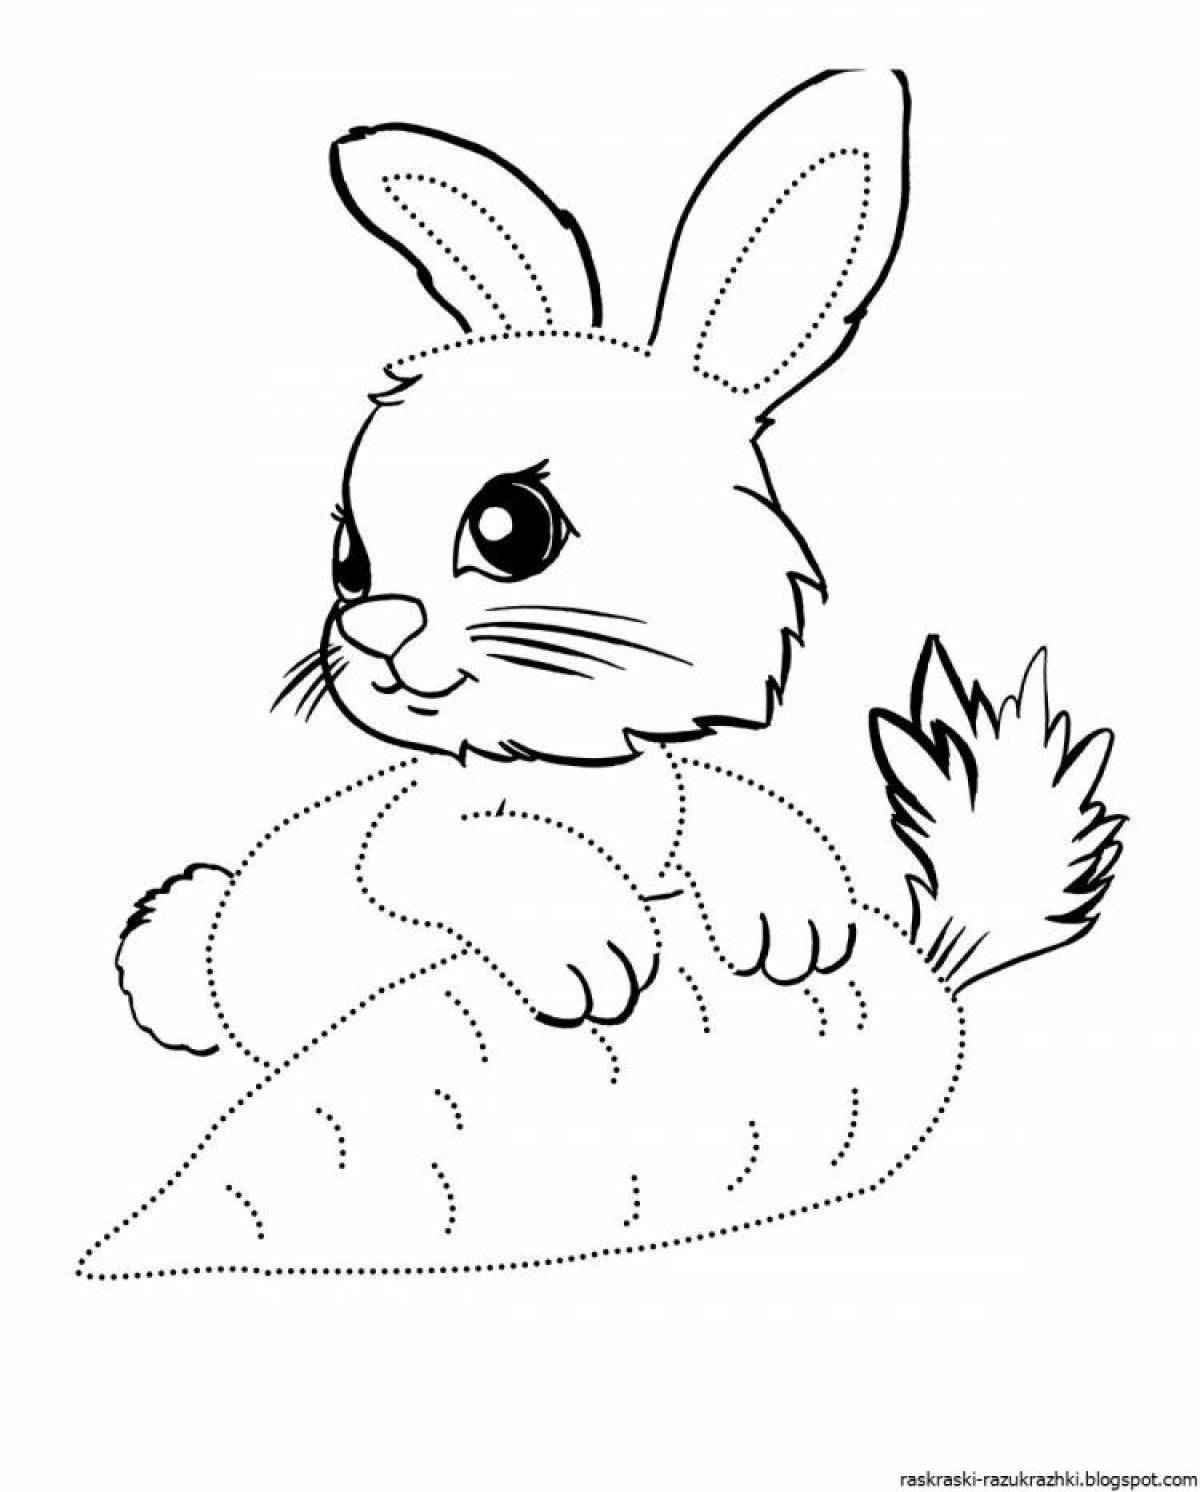 Coloring rabbit with round cheeks